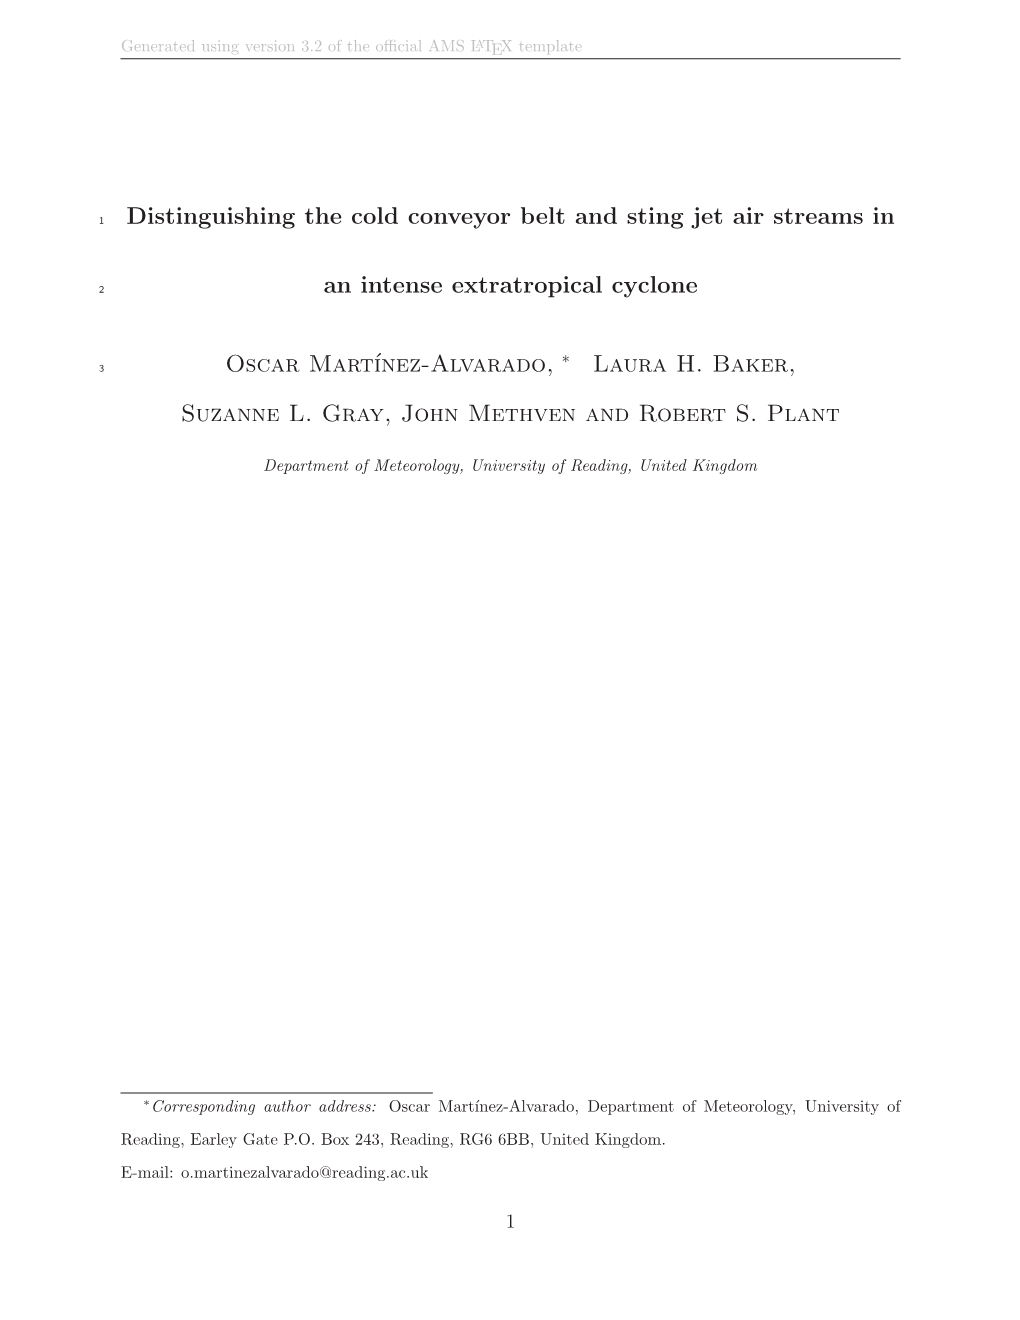 Distinguishing the Cold Conveyor Belt and Sting Jet Air Streams in An